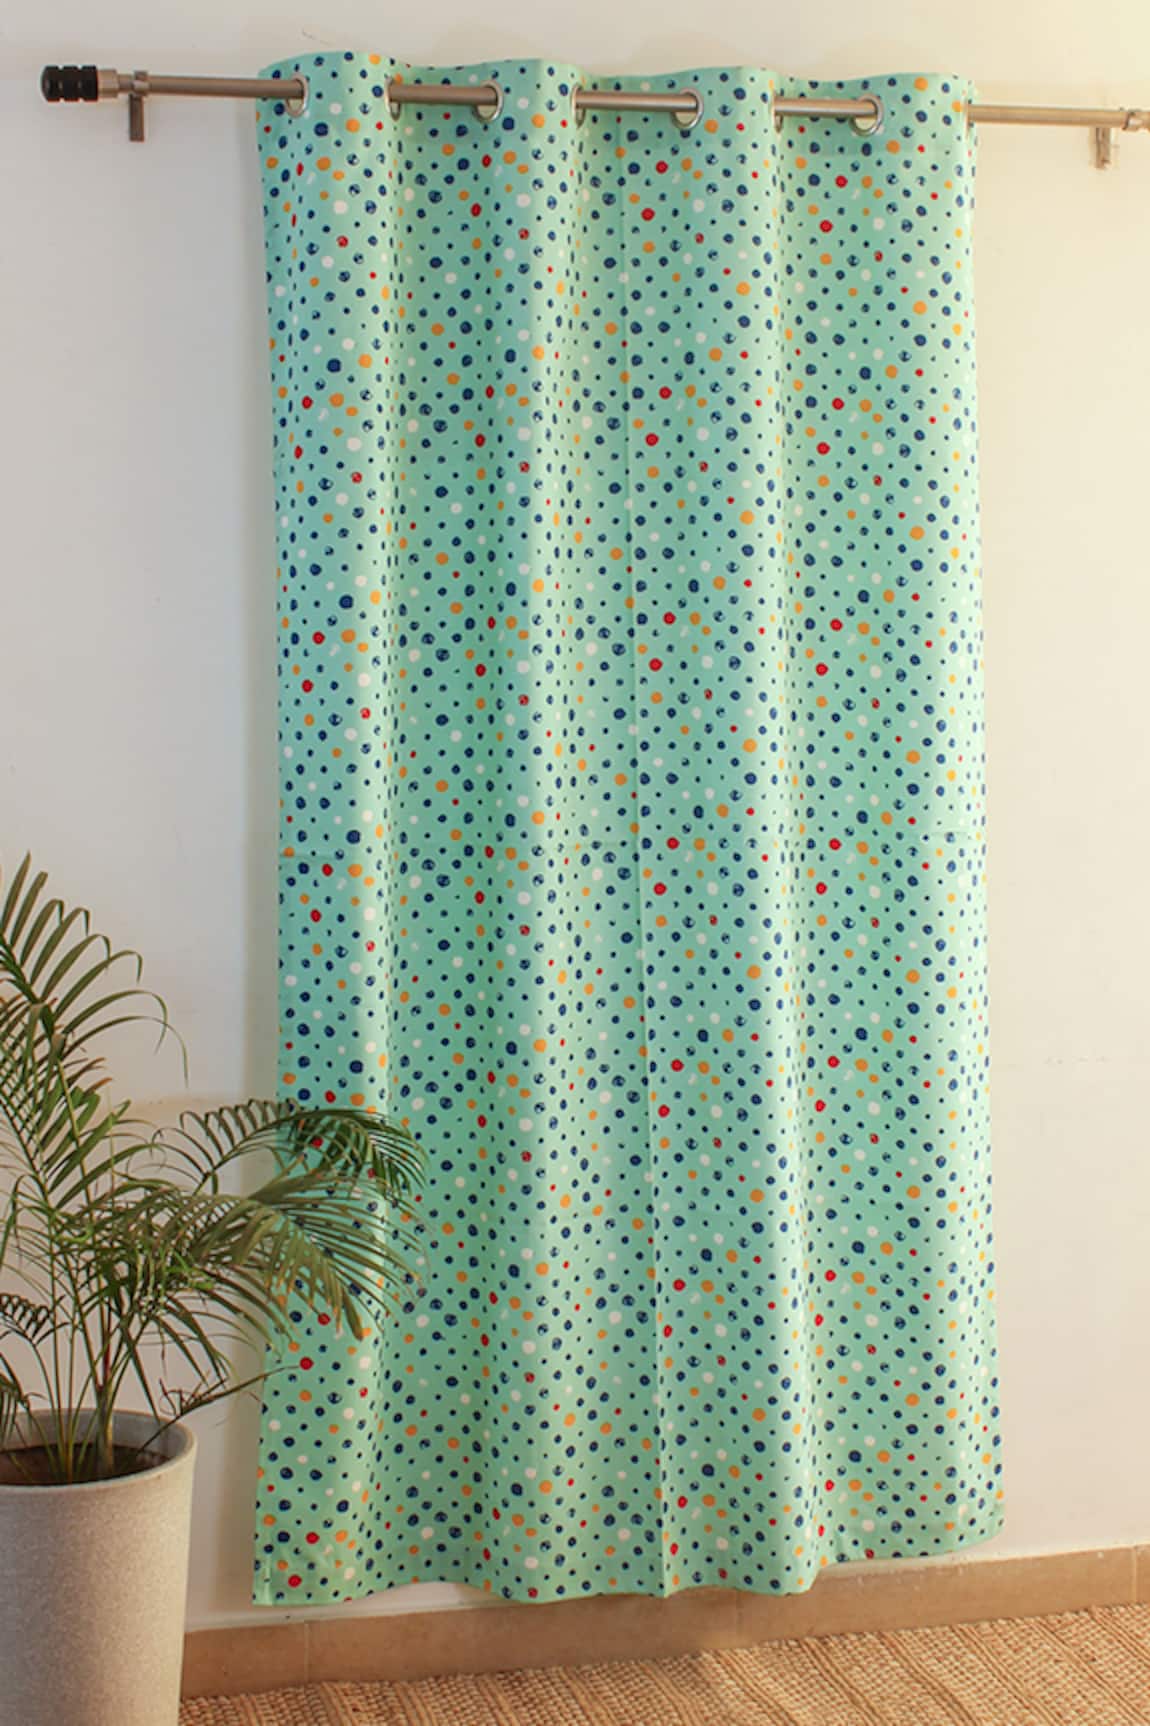 House This Contrast Polka Dot Pattern Window Curtain